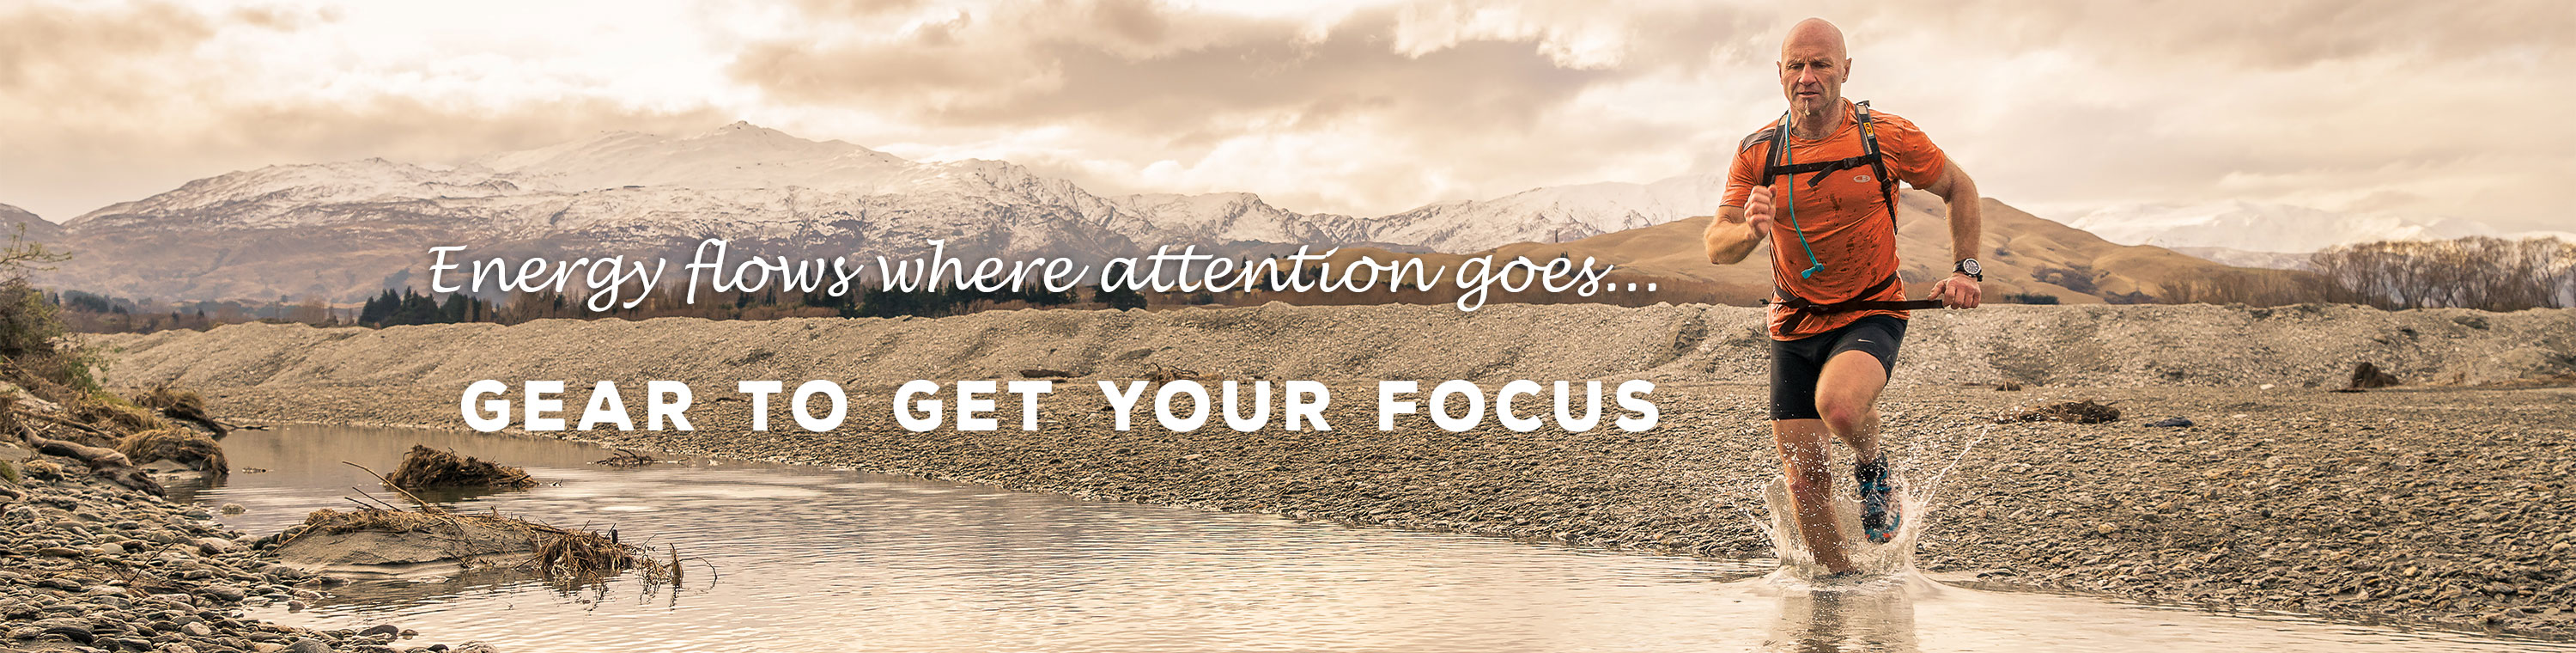 Energy Flows where attention goes - Gear to get your focus